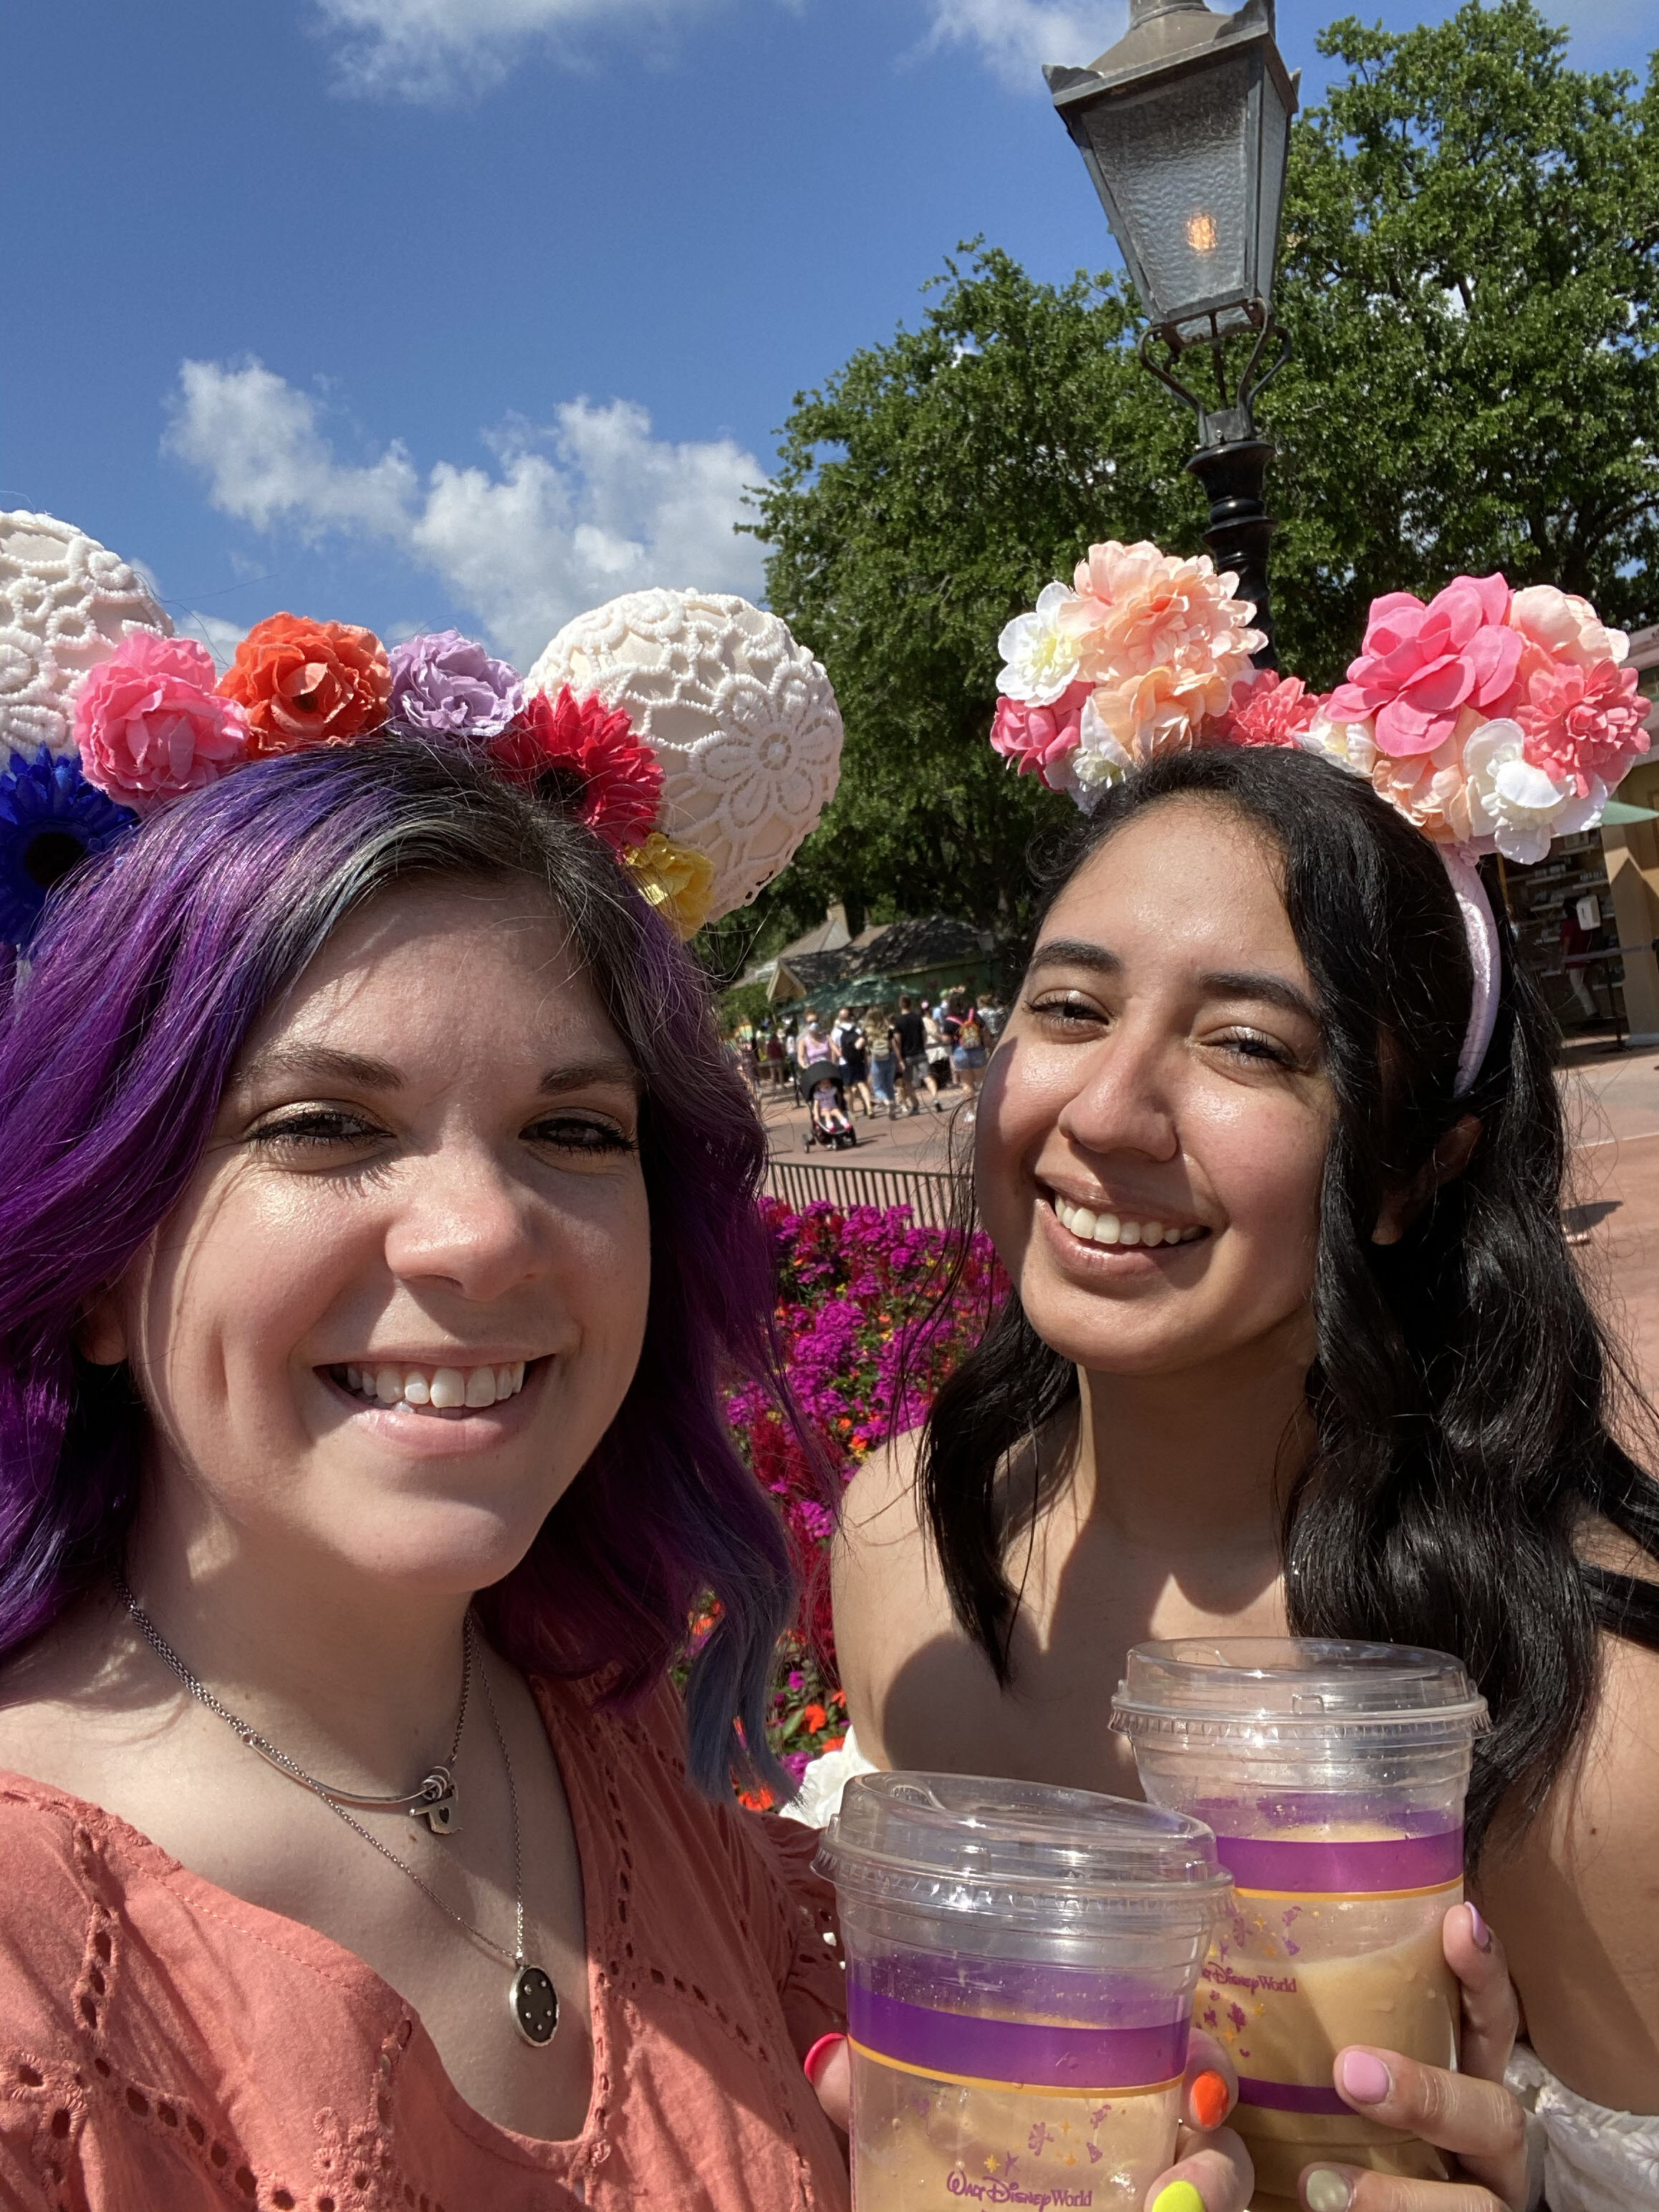 Disney’s Flower and Garden Festival at Epcot